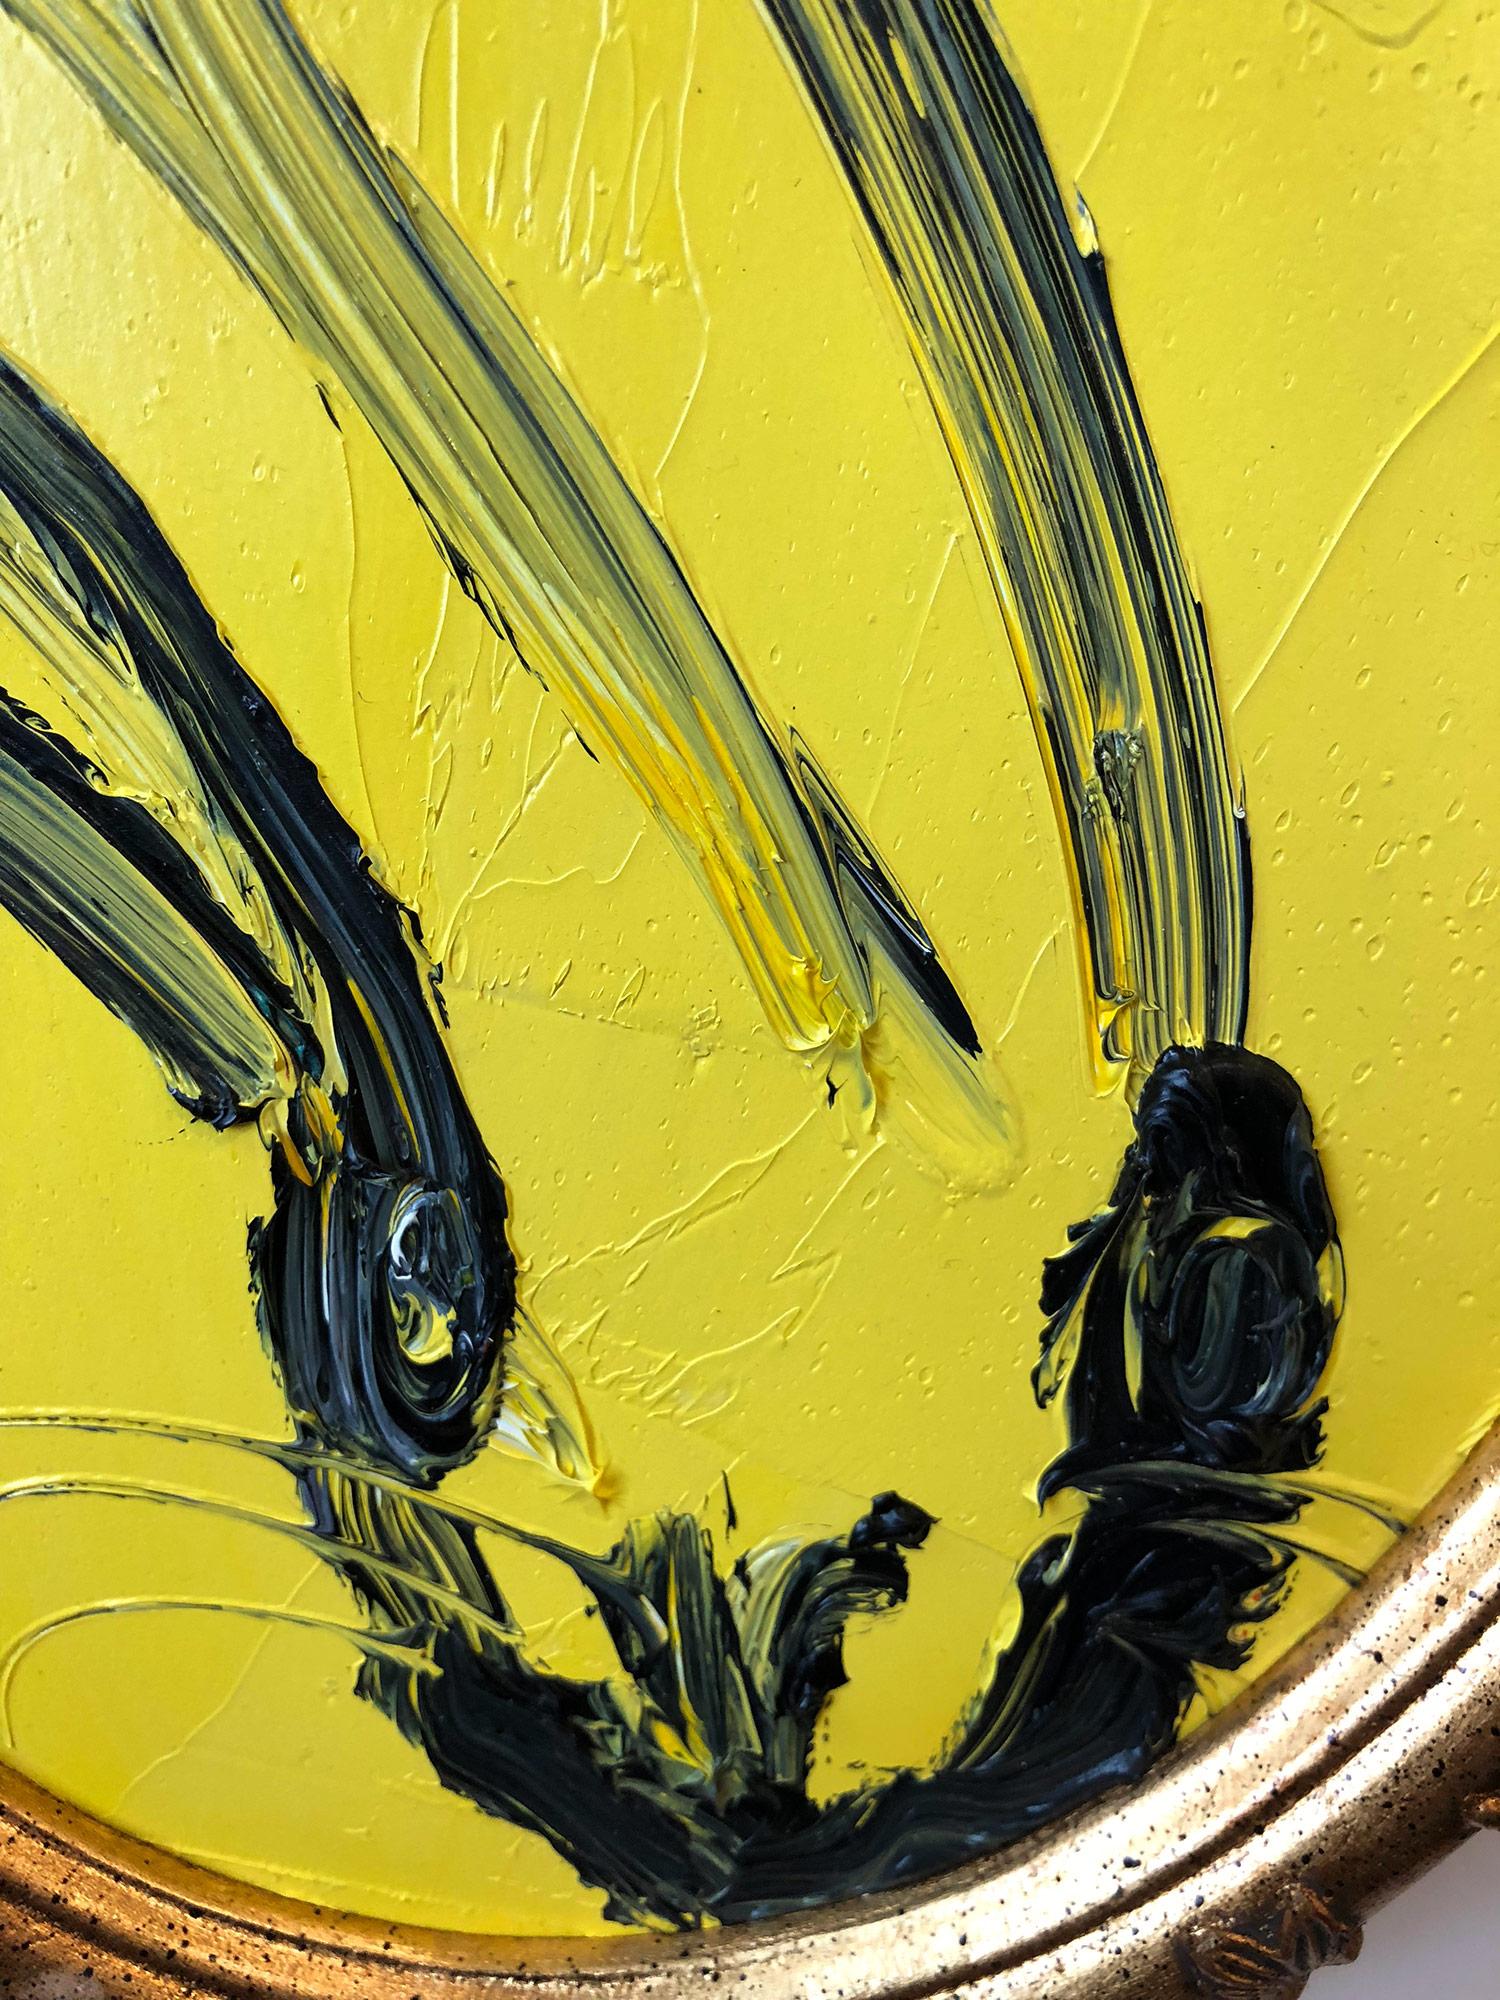 Untitled (Oval Bunny on Yellow) - Contemporary Painting by Hunt Slonem